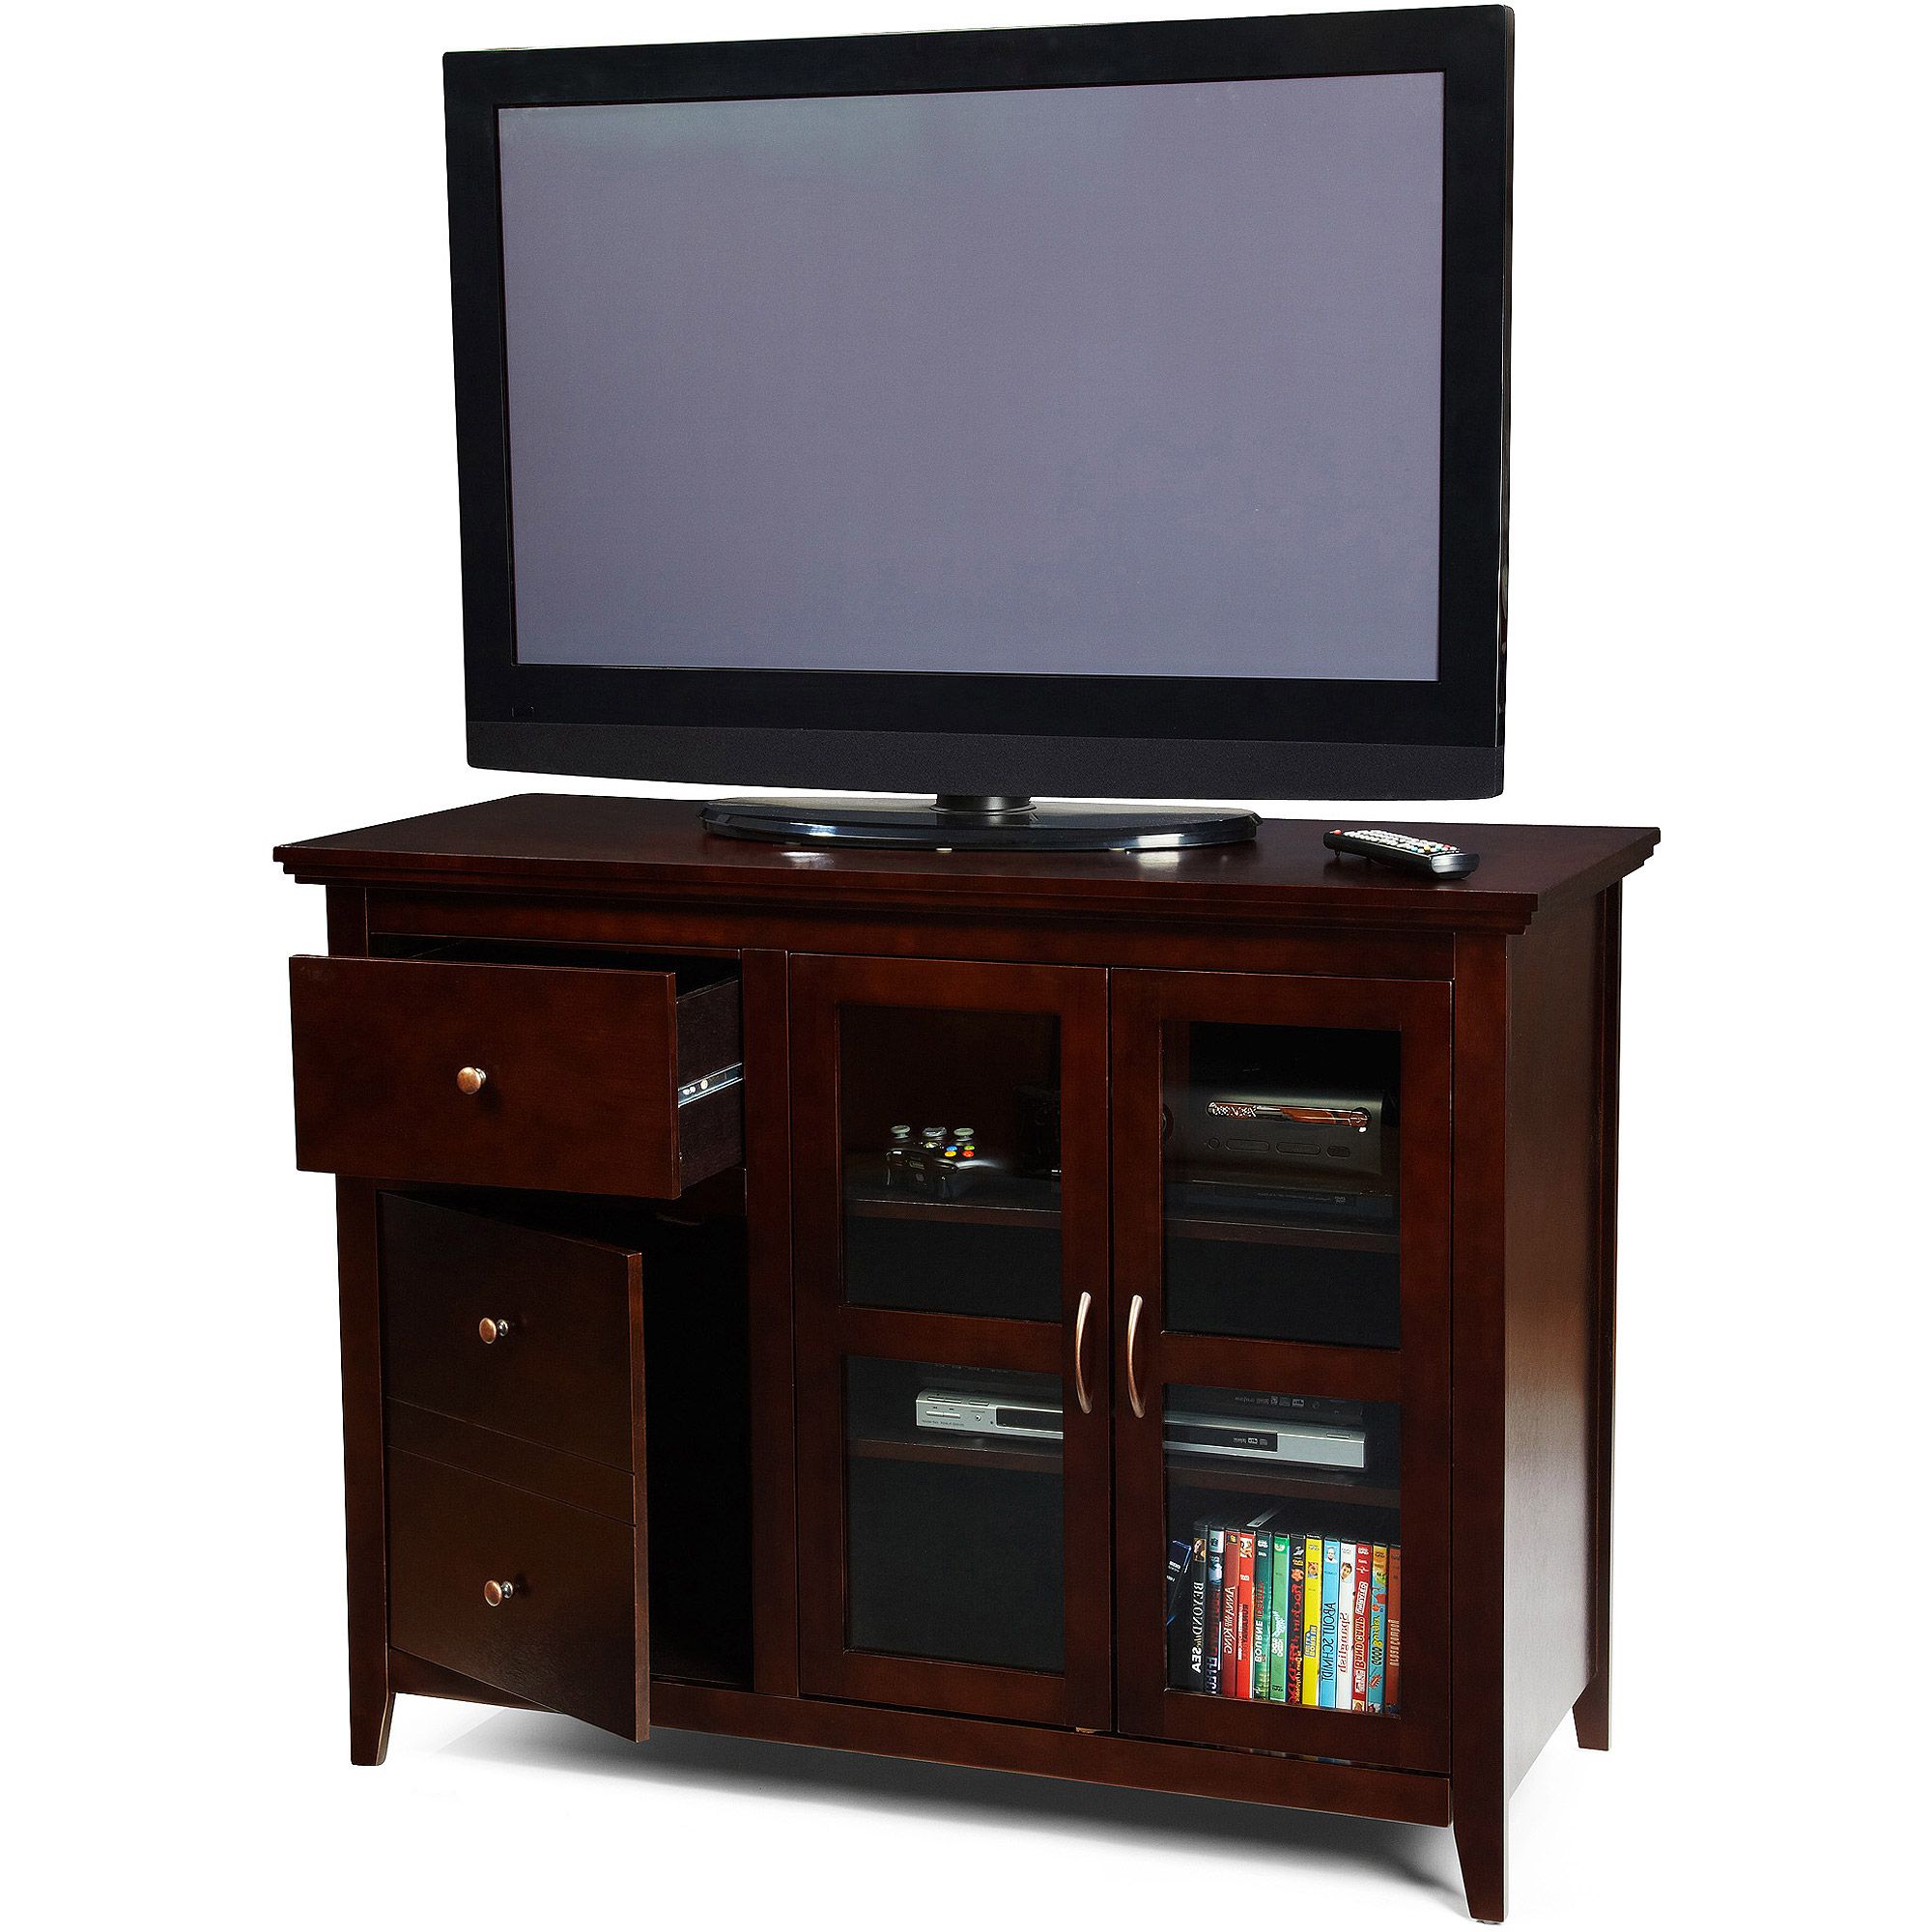 Most Popular Walker Edison Tv Stand For Tvs Up To 48", Multiple Colors Inside Vasari Corner Flat Panel Tv Stands For Tvs Up To 48" Black (View 2 of 10)